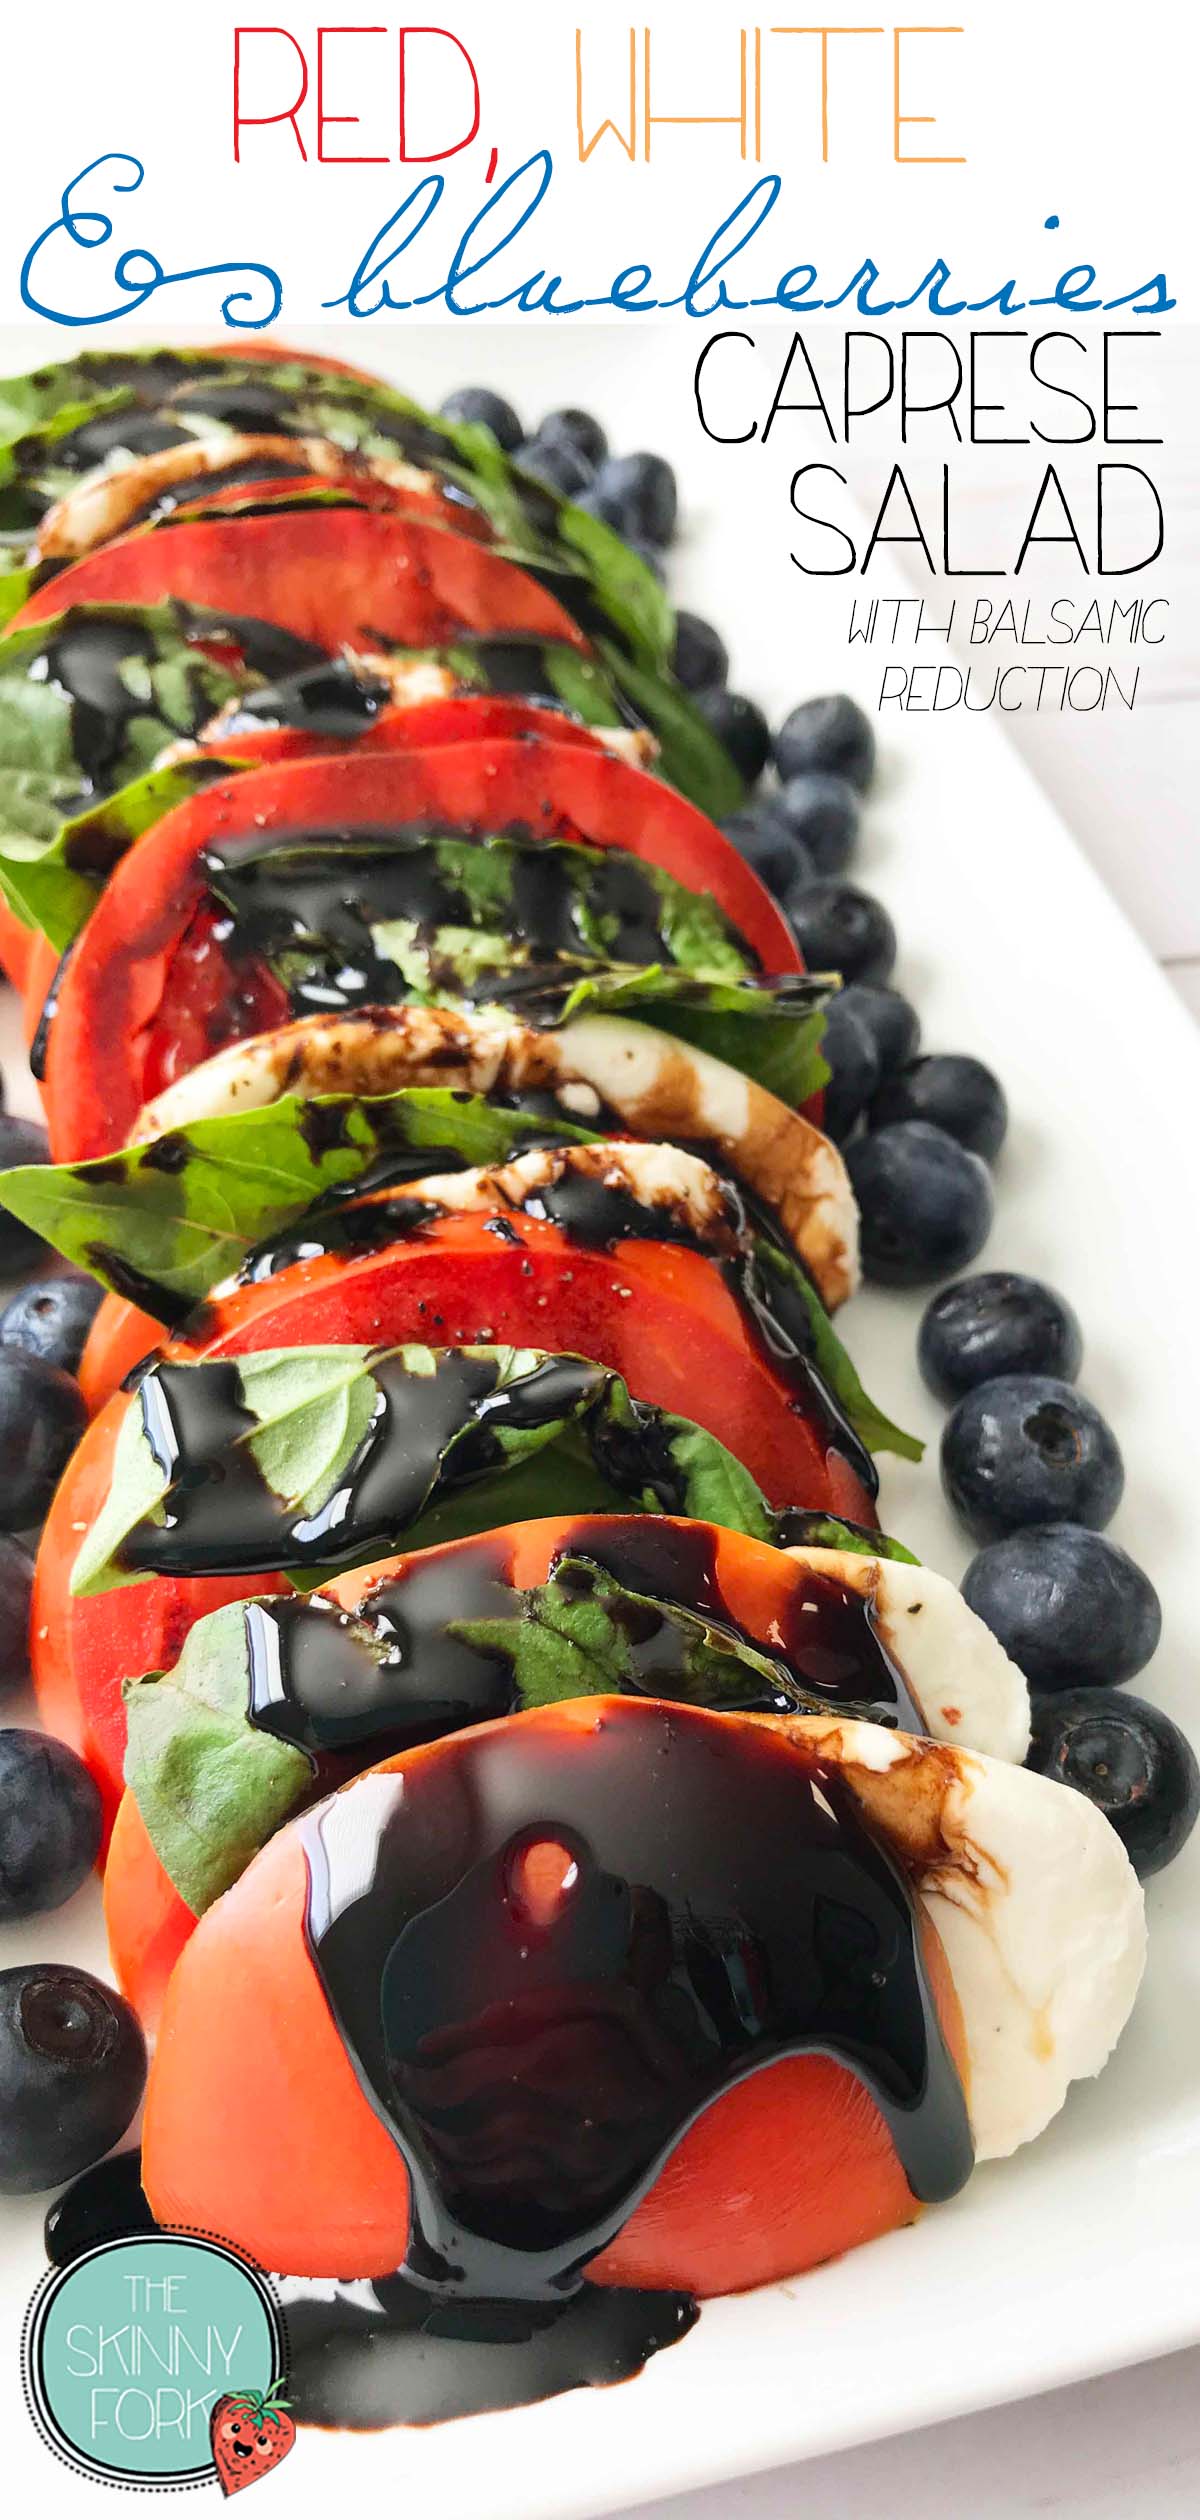 Red, White & Blueberries Caprese (With Balsamic Reduction)